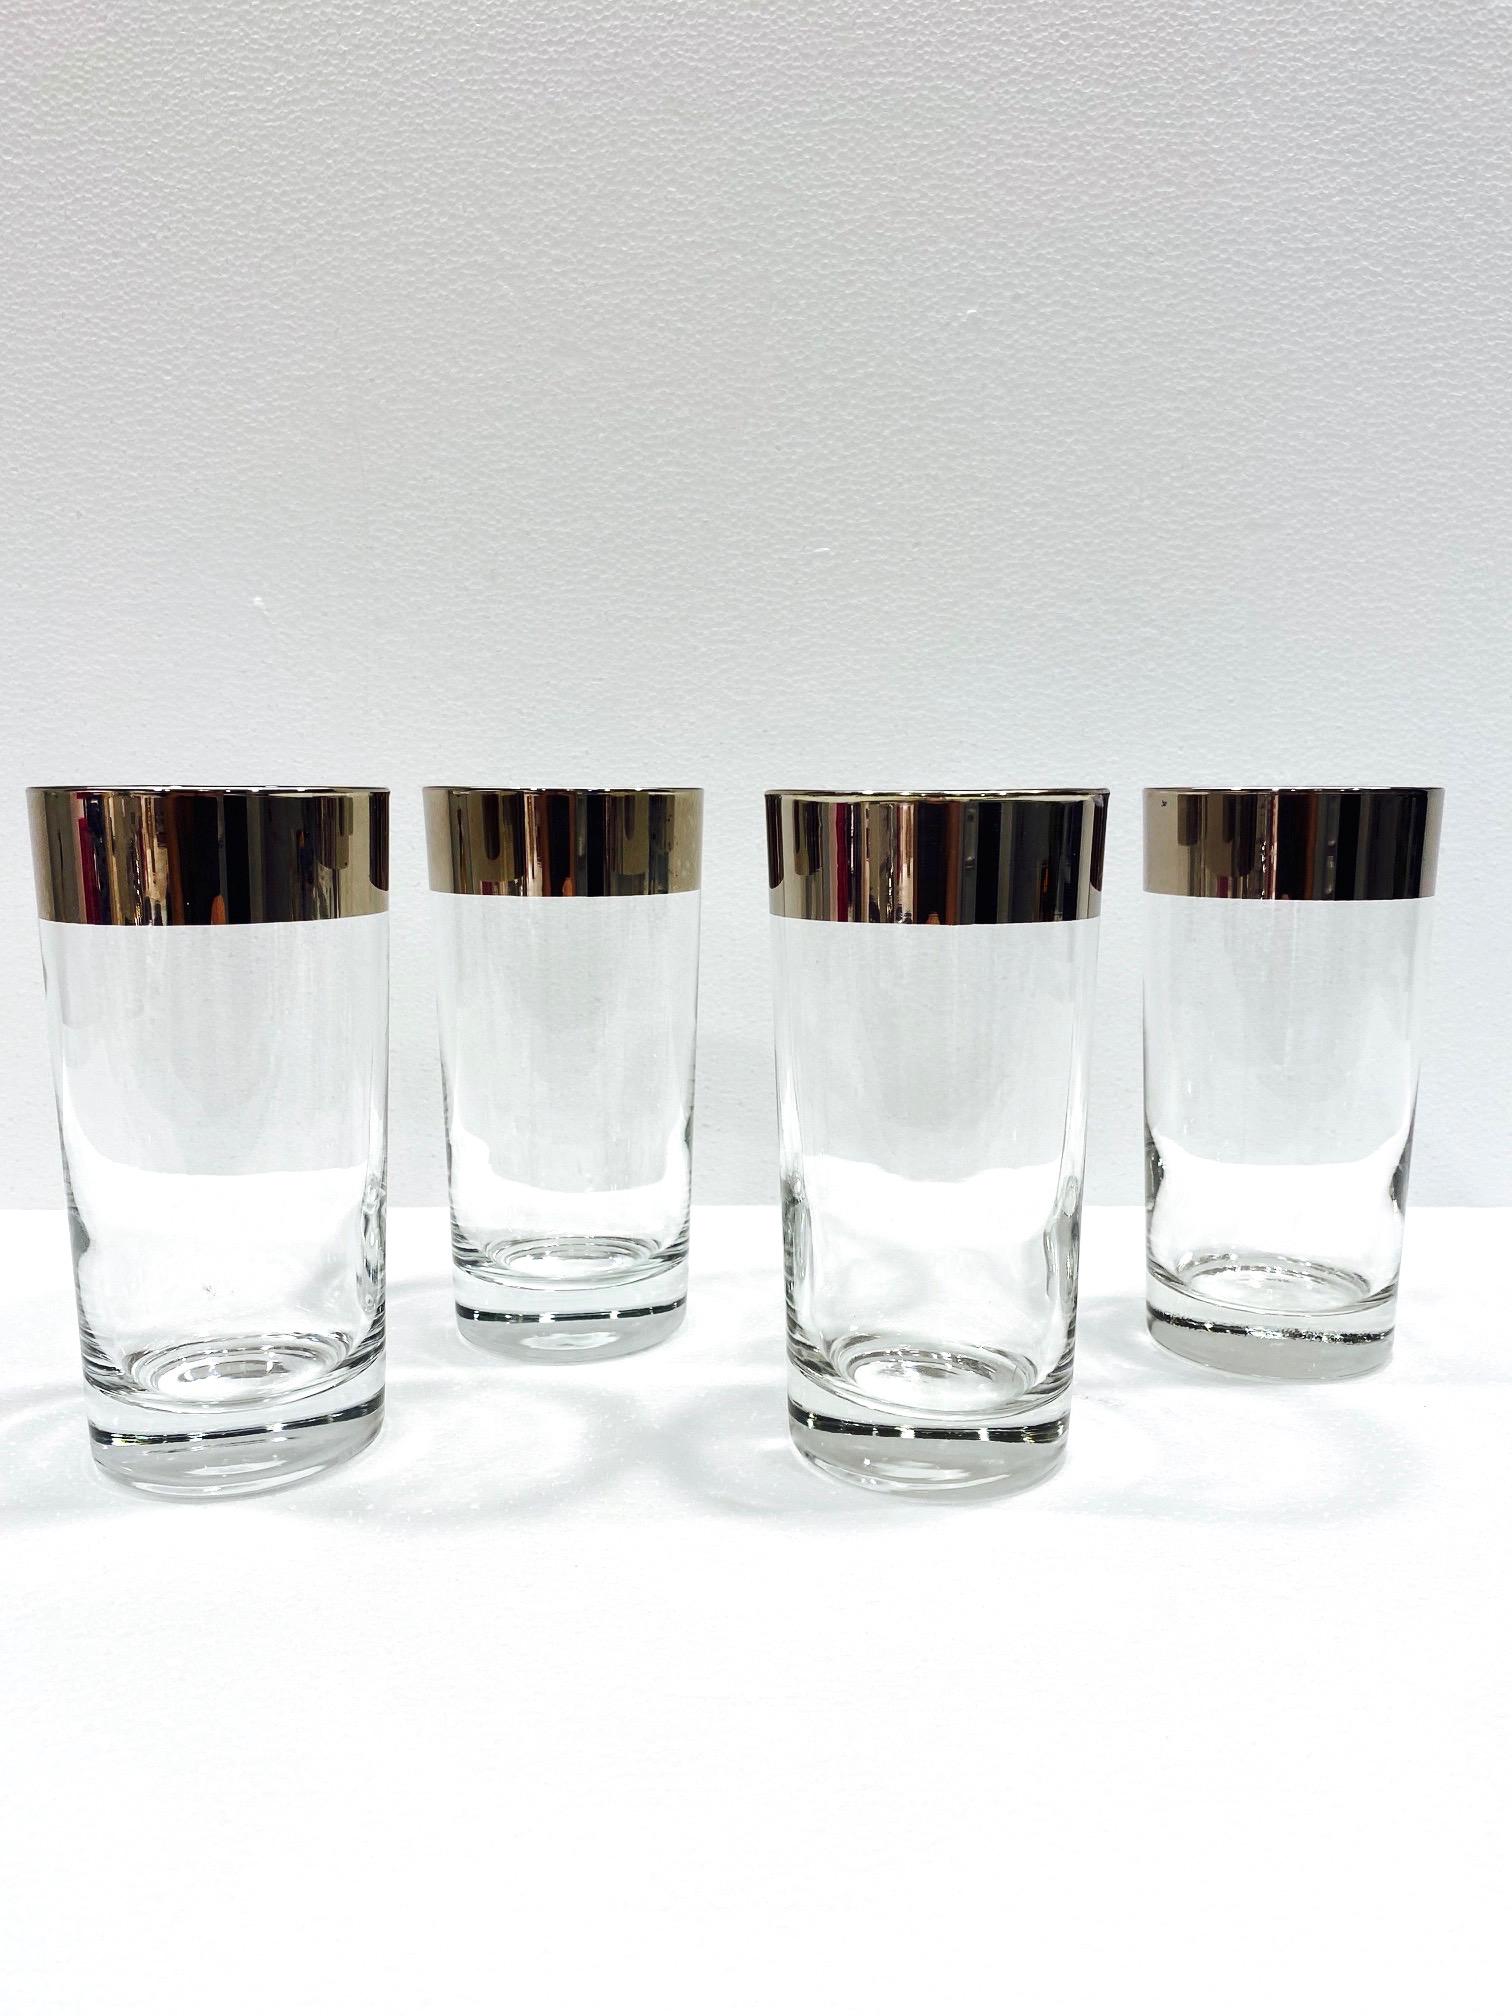 Set of four vintage highball or Tom Collins cocktail glasses. Barware glasses feature sleek cylinder form with the iconic silver rims for which Thorpe is recognized and highly sought after. These make an excellent and cheerful addition to any